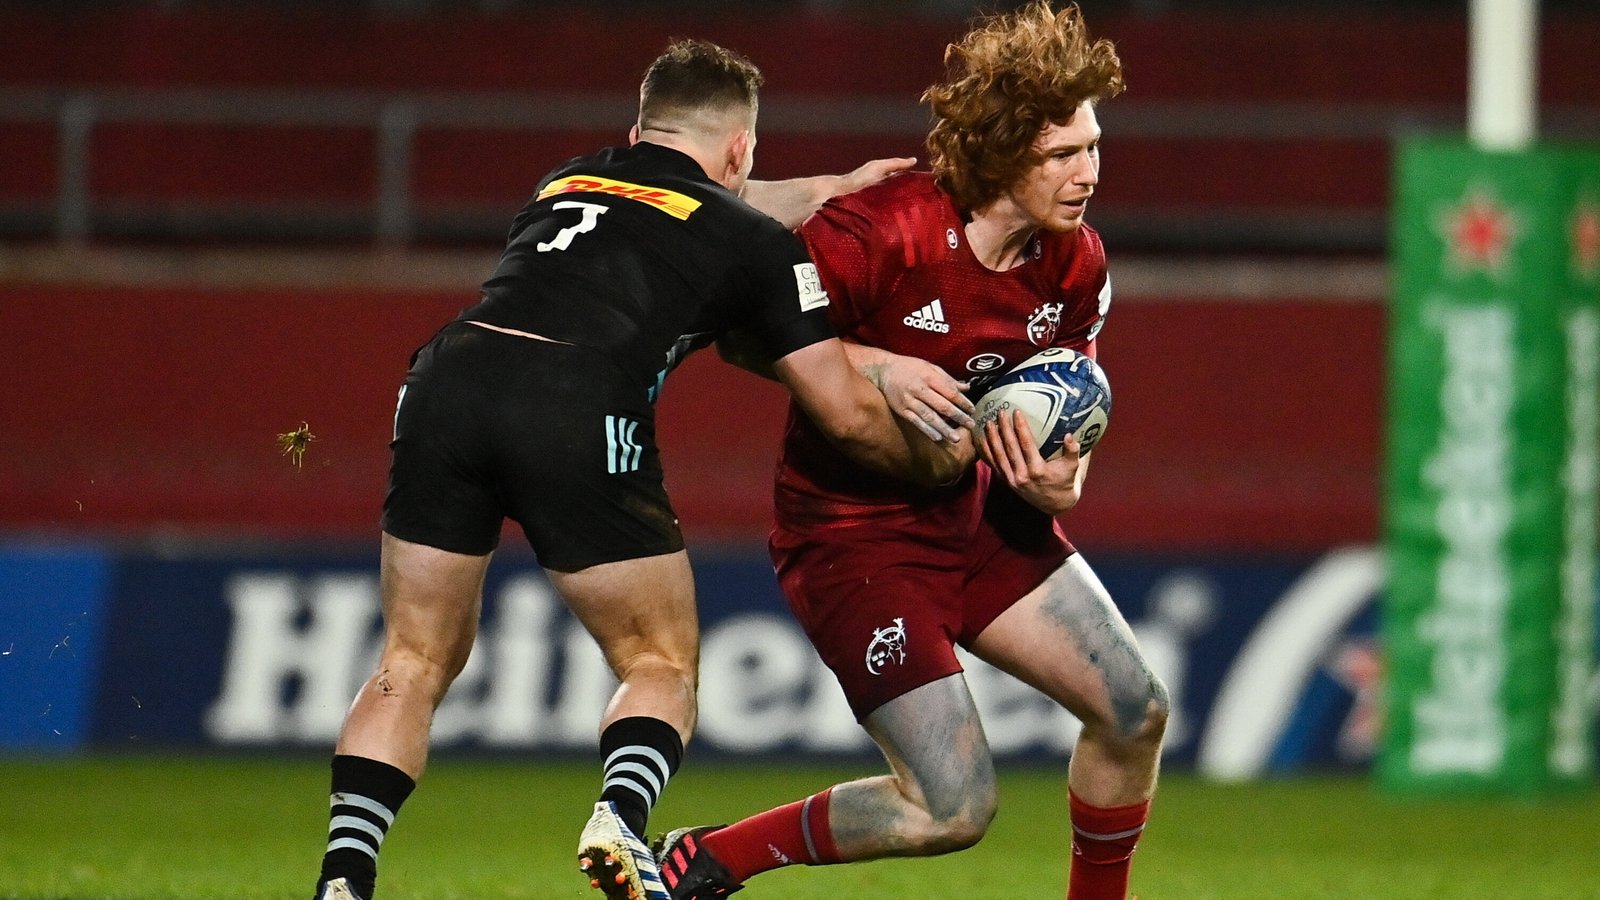 Munster boss hits out at 'unacceptable' Quins tactics